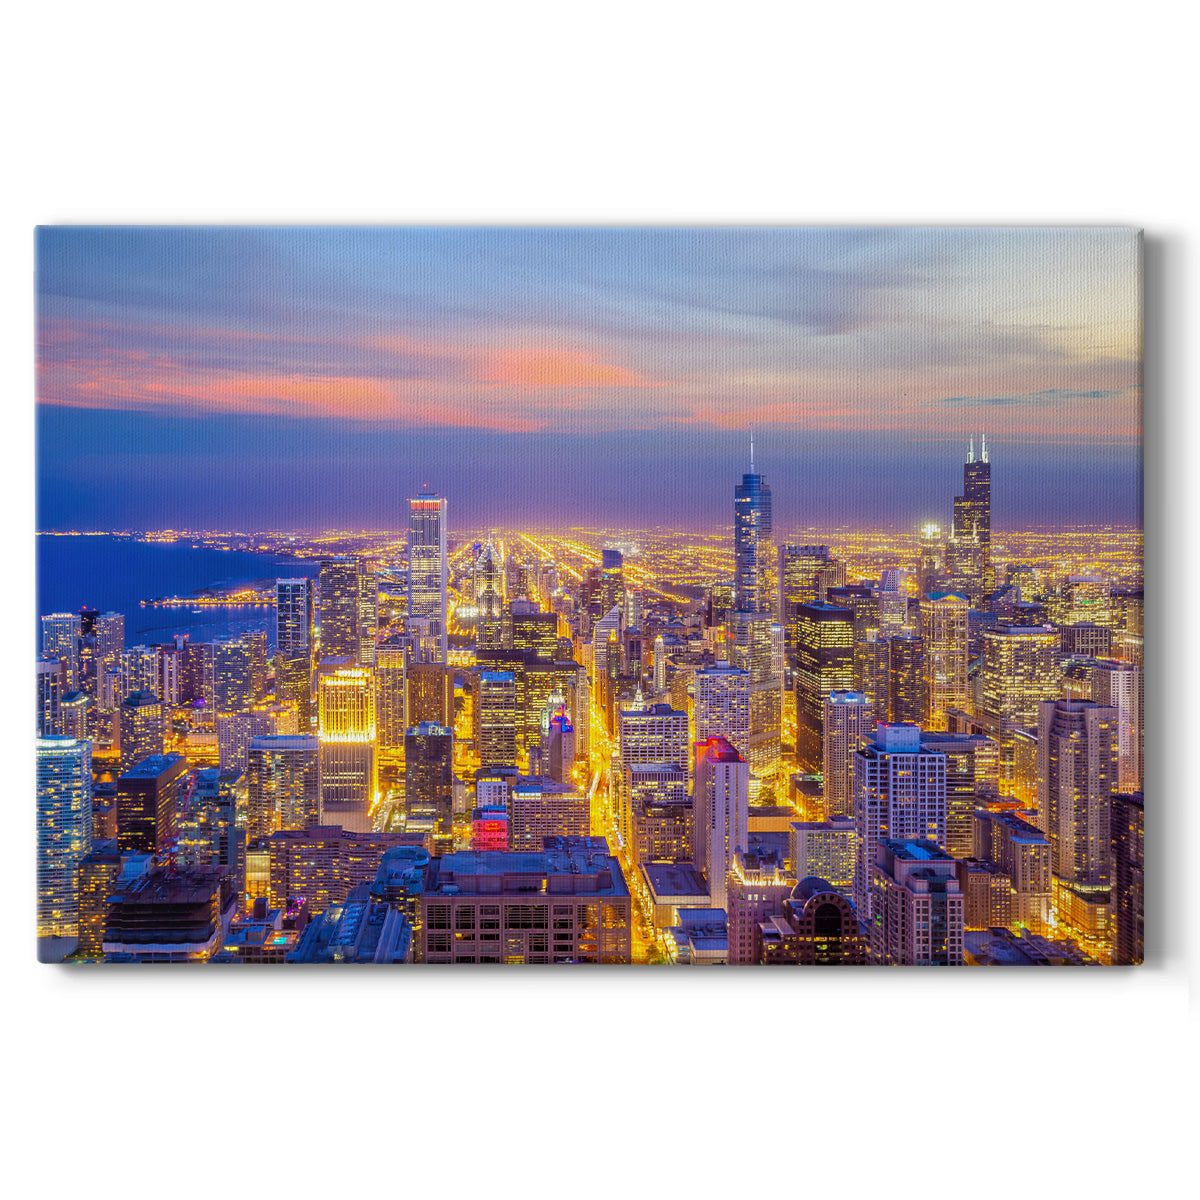 Chicago at Night Aerial - Gallery Wrapped Canvas